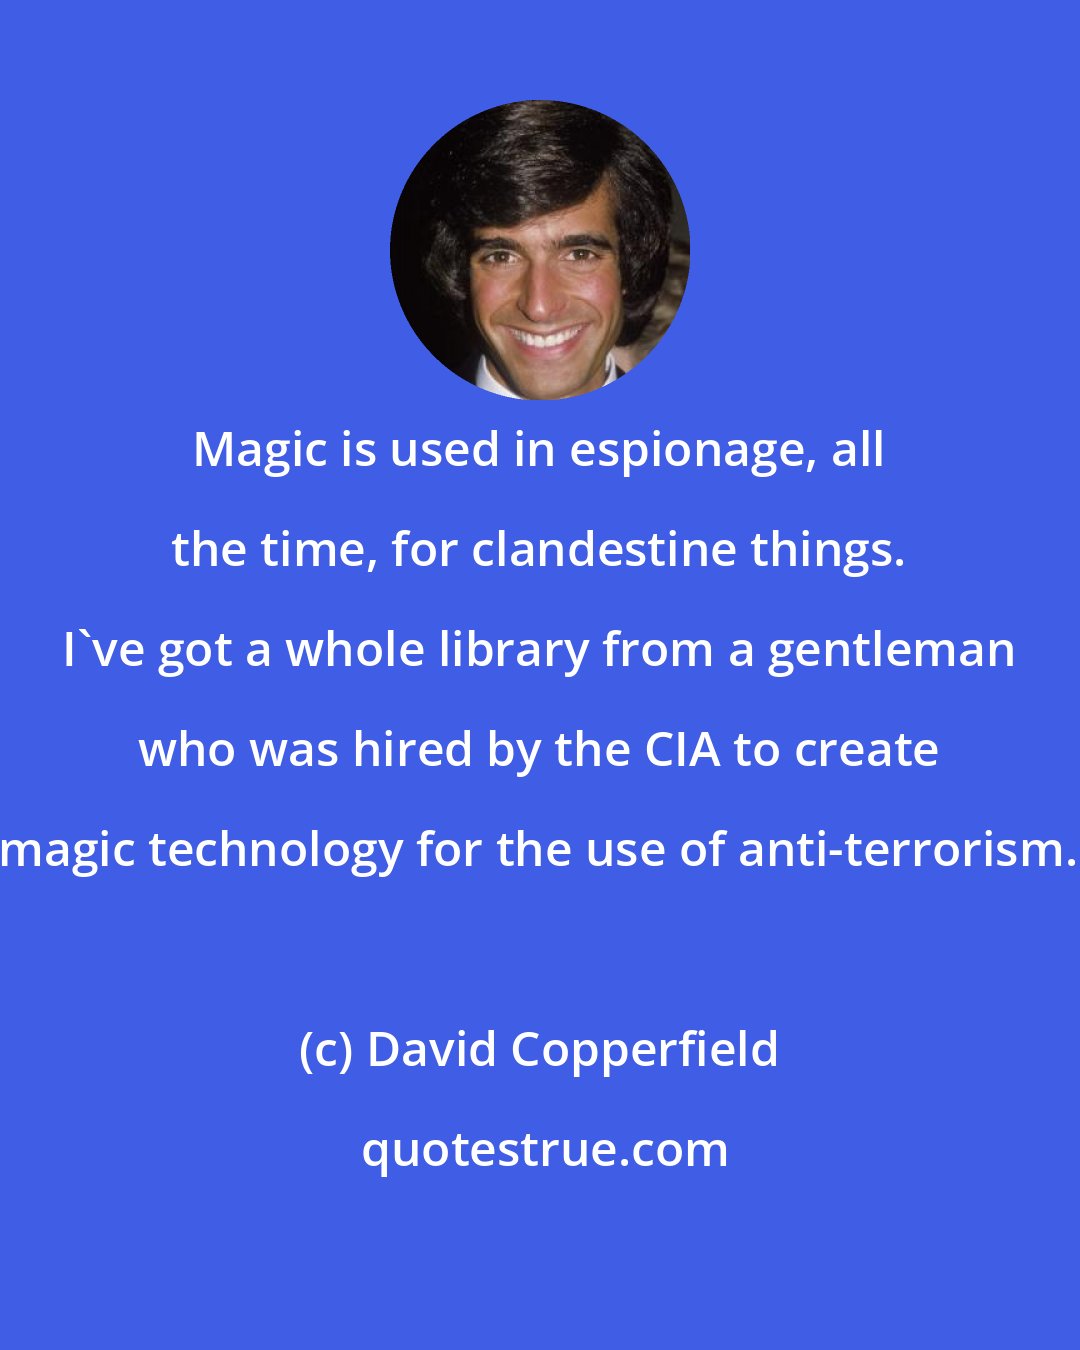 David Copperfield: Magic is used in espionage, all the time, for clandestine things. I've got a whole library from a gentleman who was hired by the CIA to create magic technology for the use of anti-terrorism.